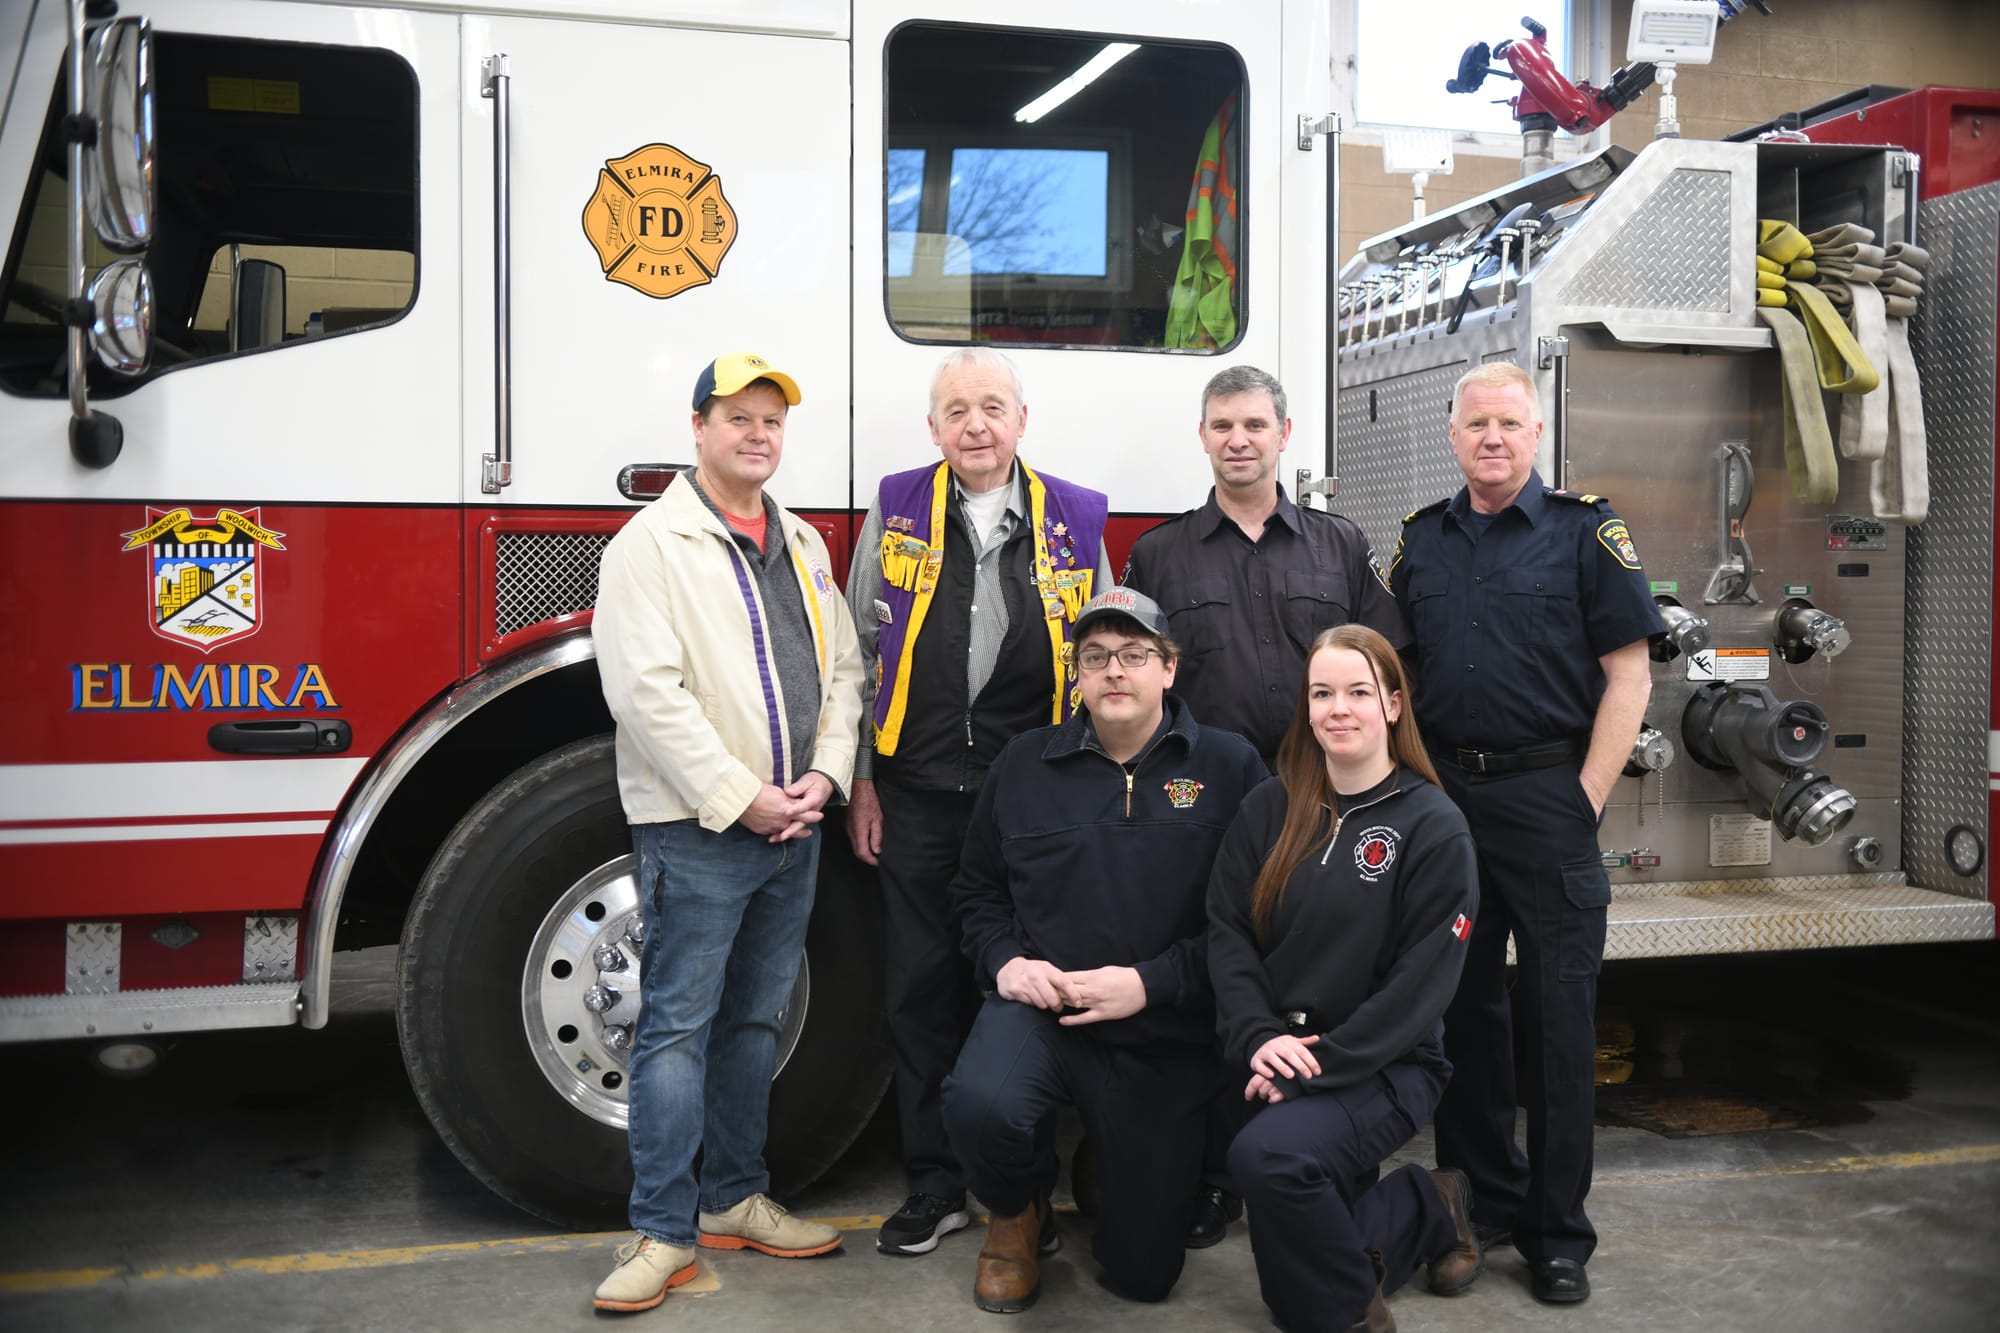                      Elmira firefighters planning first Paddy’s Day dance since the pandemic                             
                     